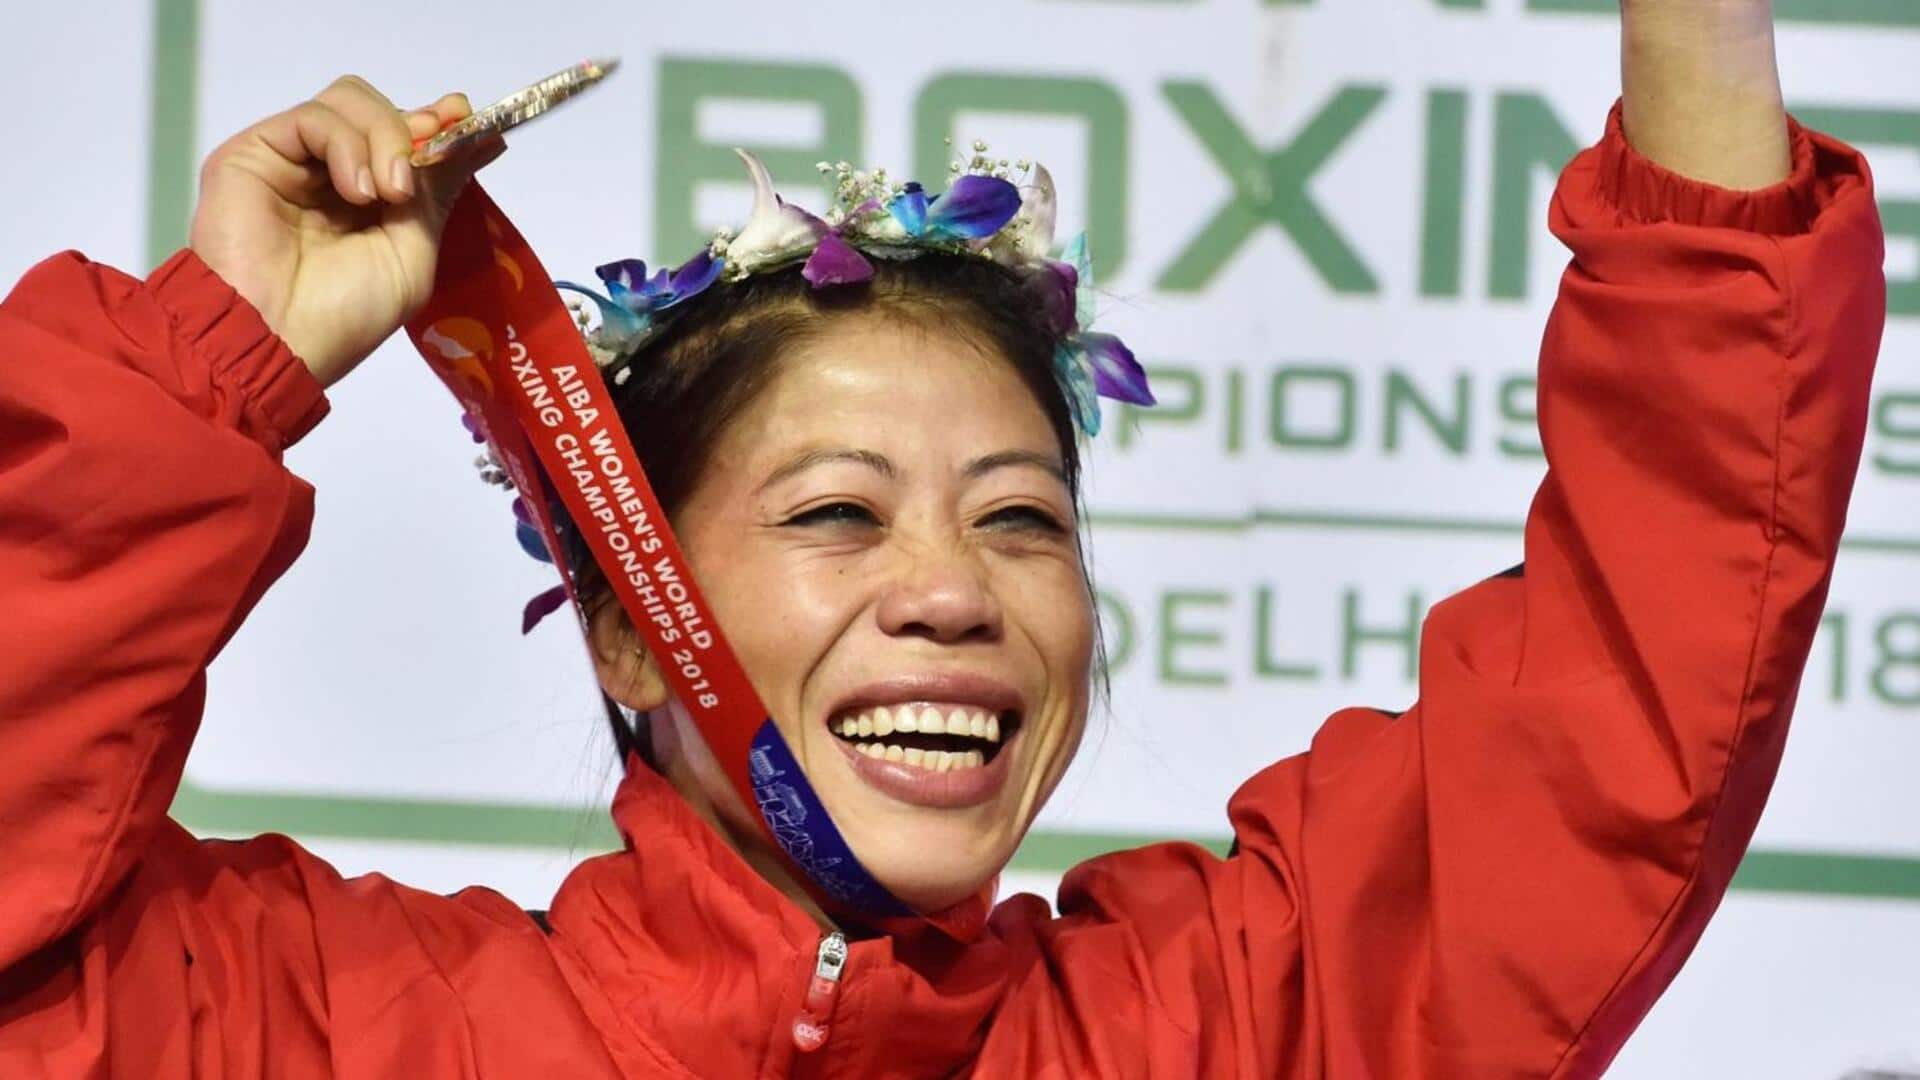 'I have been misquoted' - Mary Kom refutes retirement reports